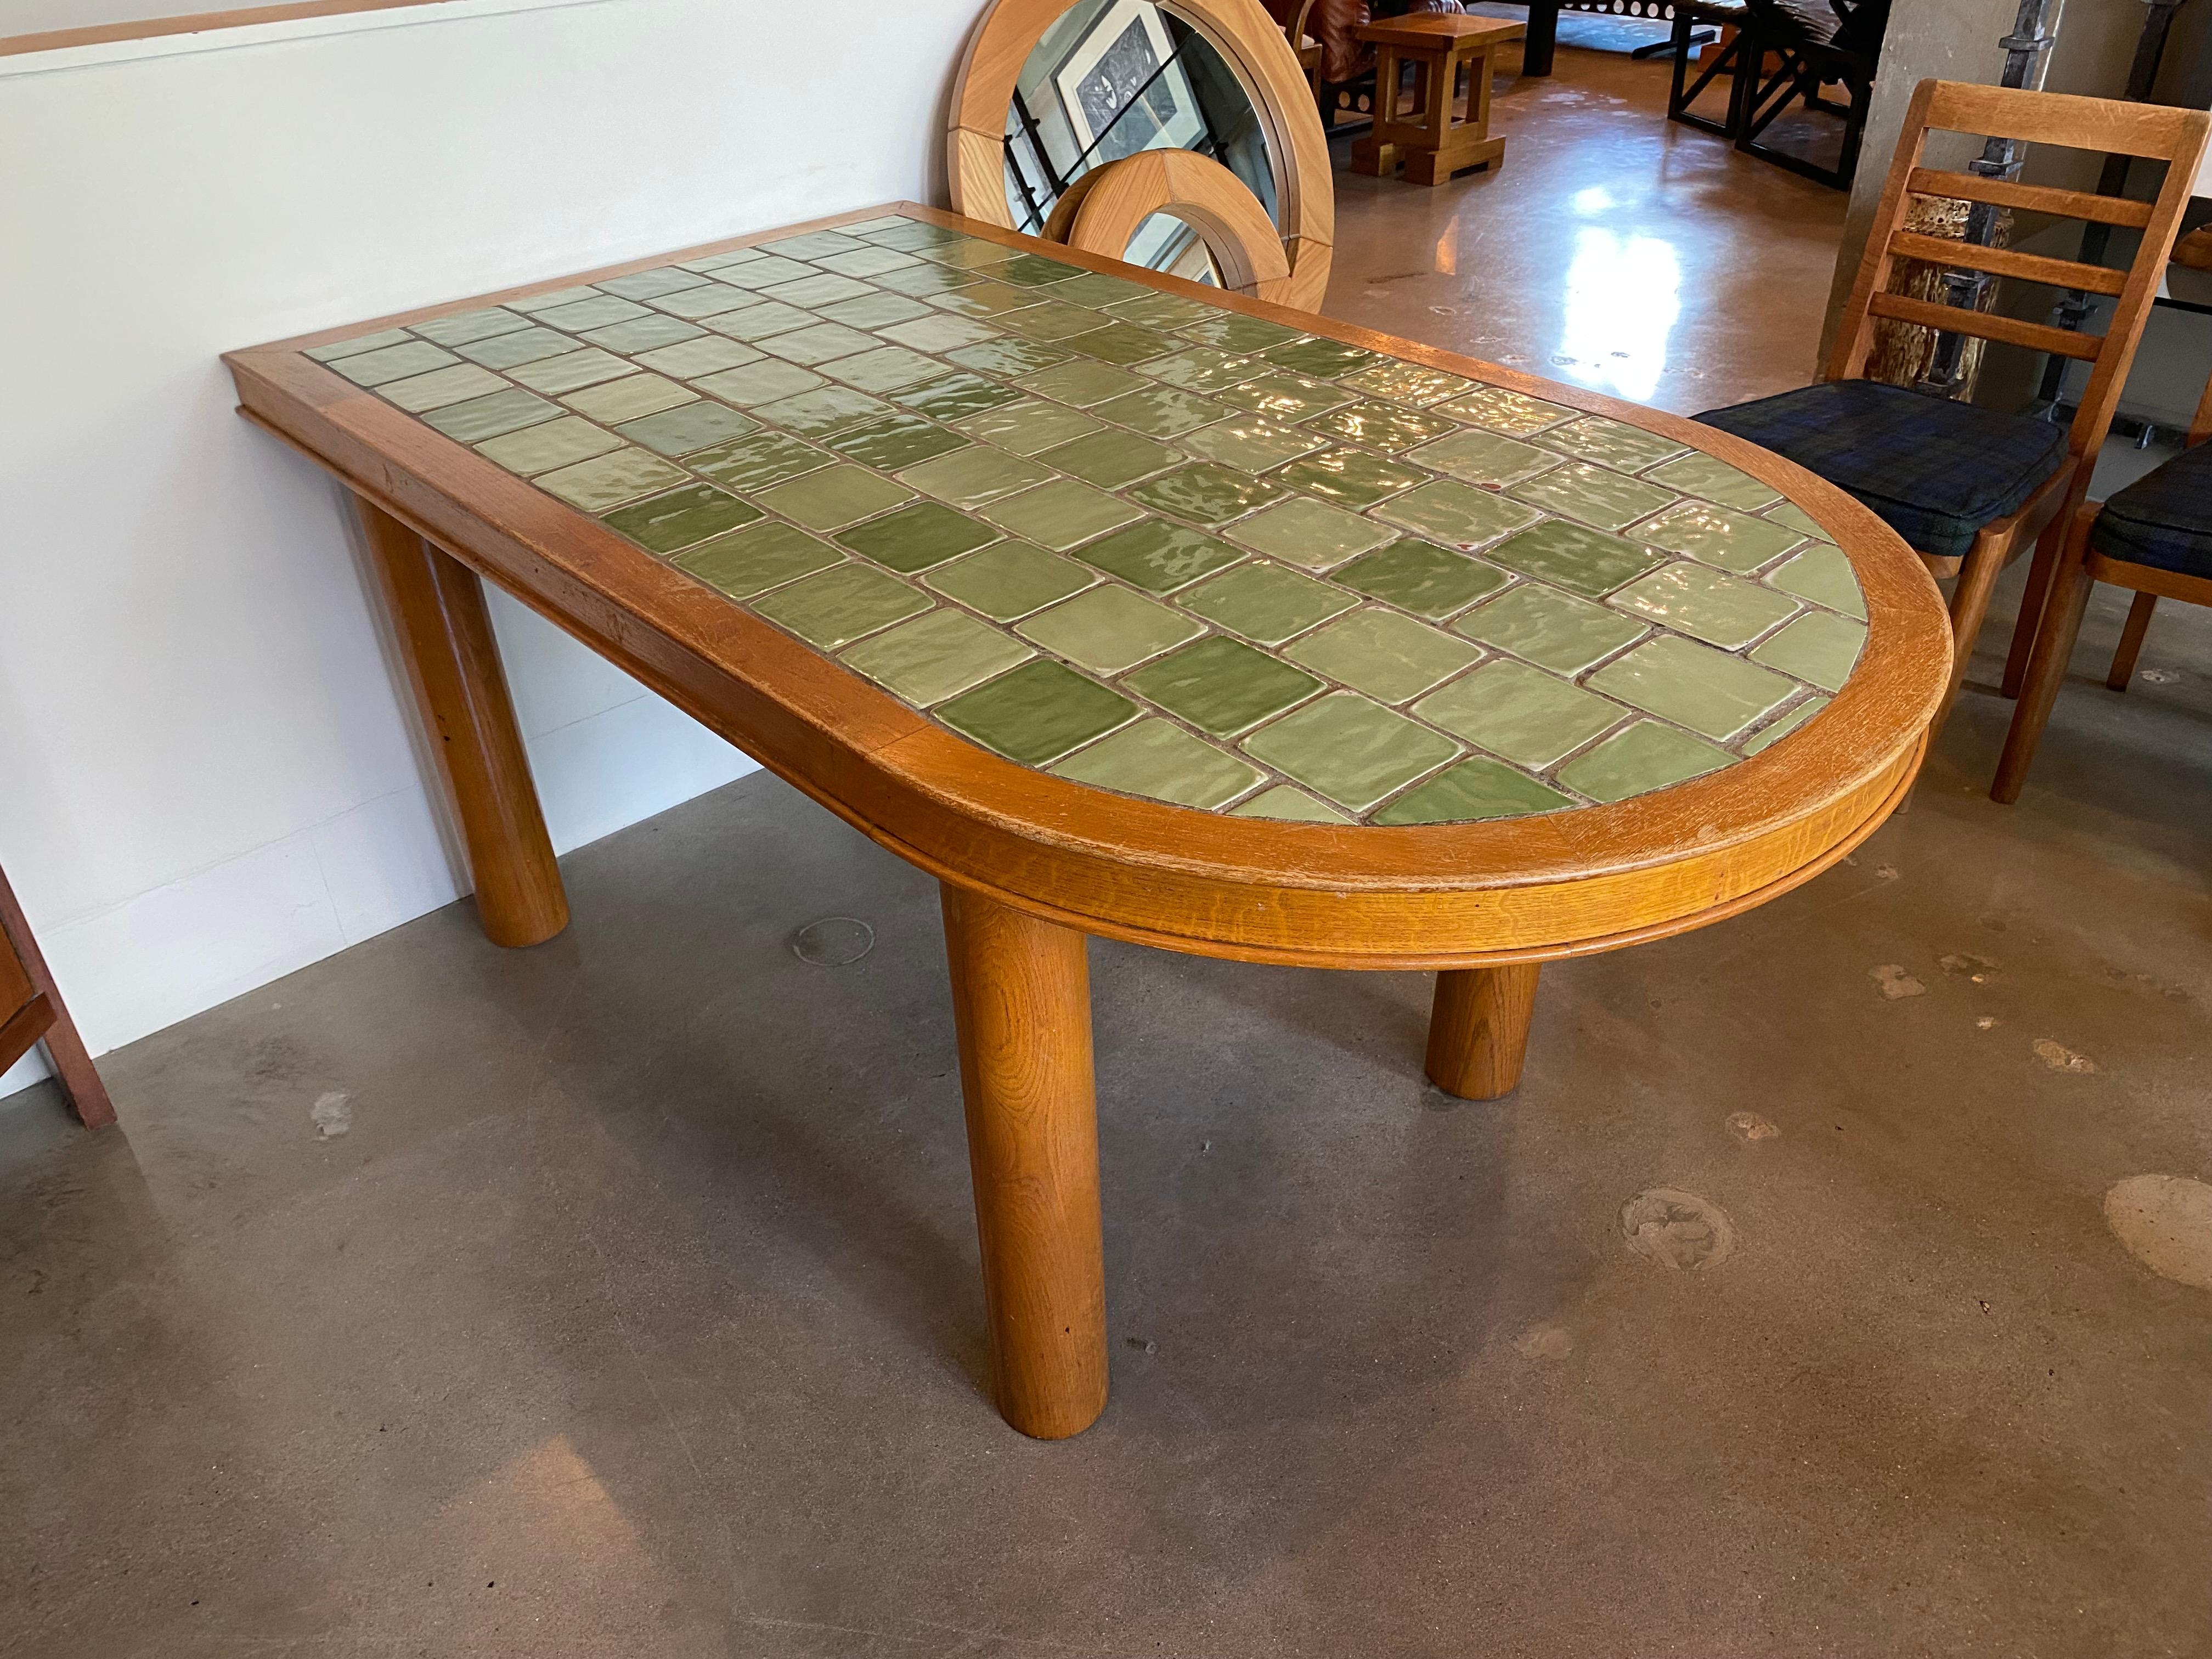 French oak dining table with inset green ceramic tile top. Straight on one end and rounded on the other, can abut a wall if desired. In the style of Guillerme et Chambron. France, 1940-50's.